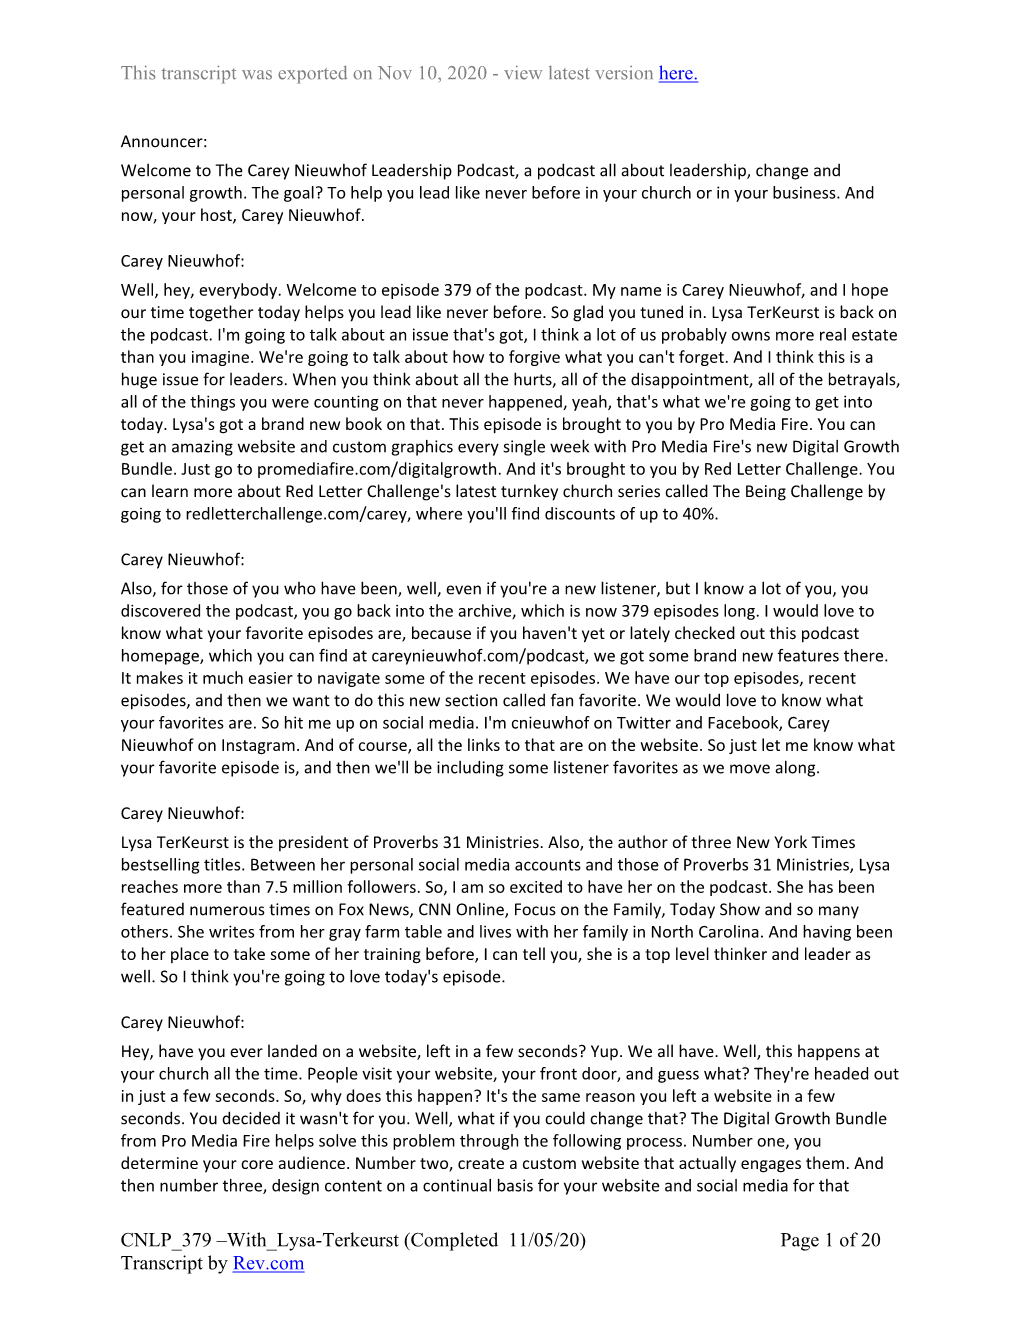 With Lysa-Terkeurst (Completed 11/05/20) Page 1 of 20 Transcript by Rev.Com This Transcript Was Exported on Nov 10, 2020 - View Latest Version Here